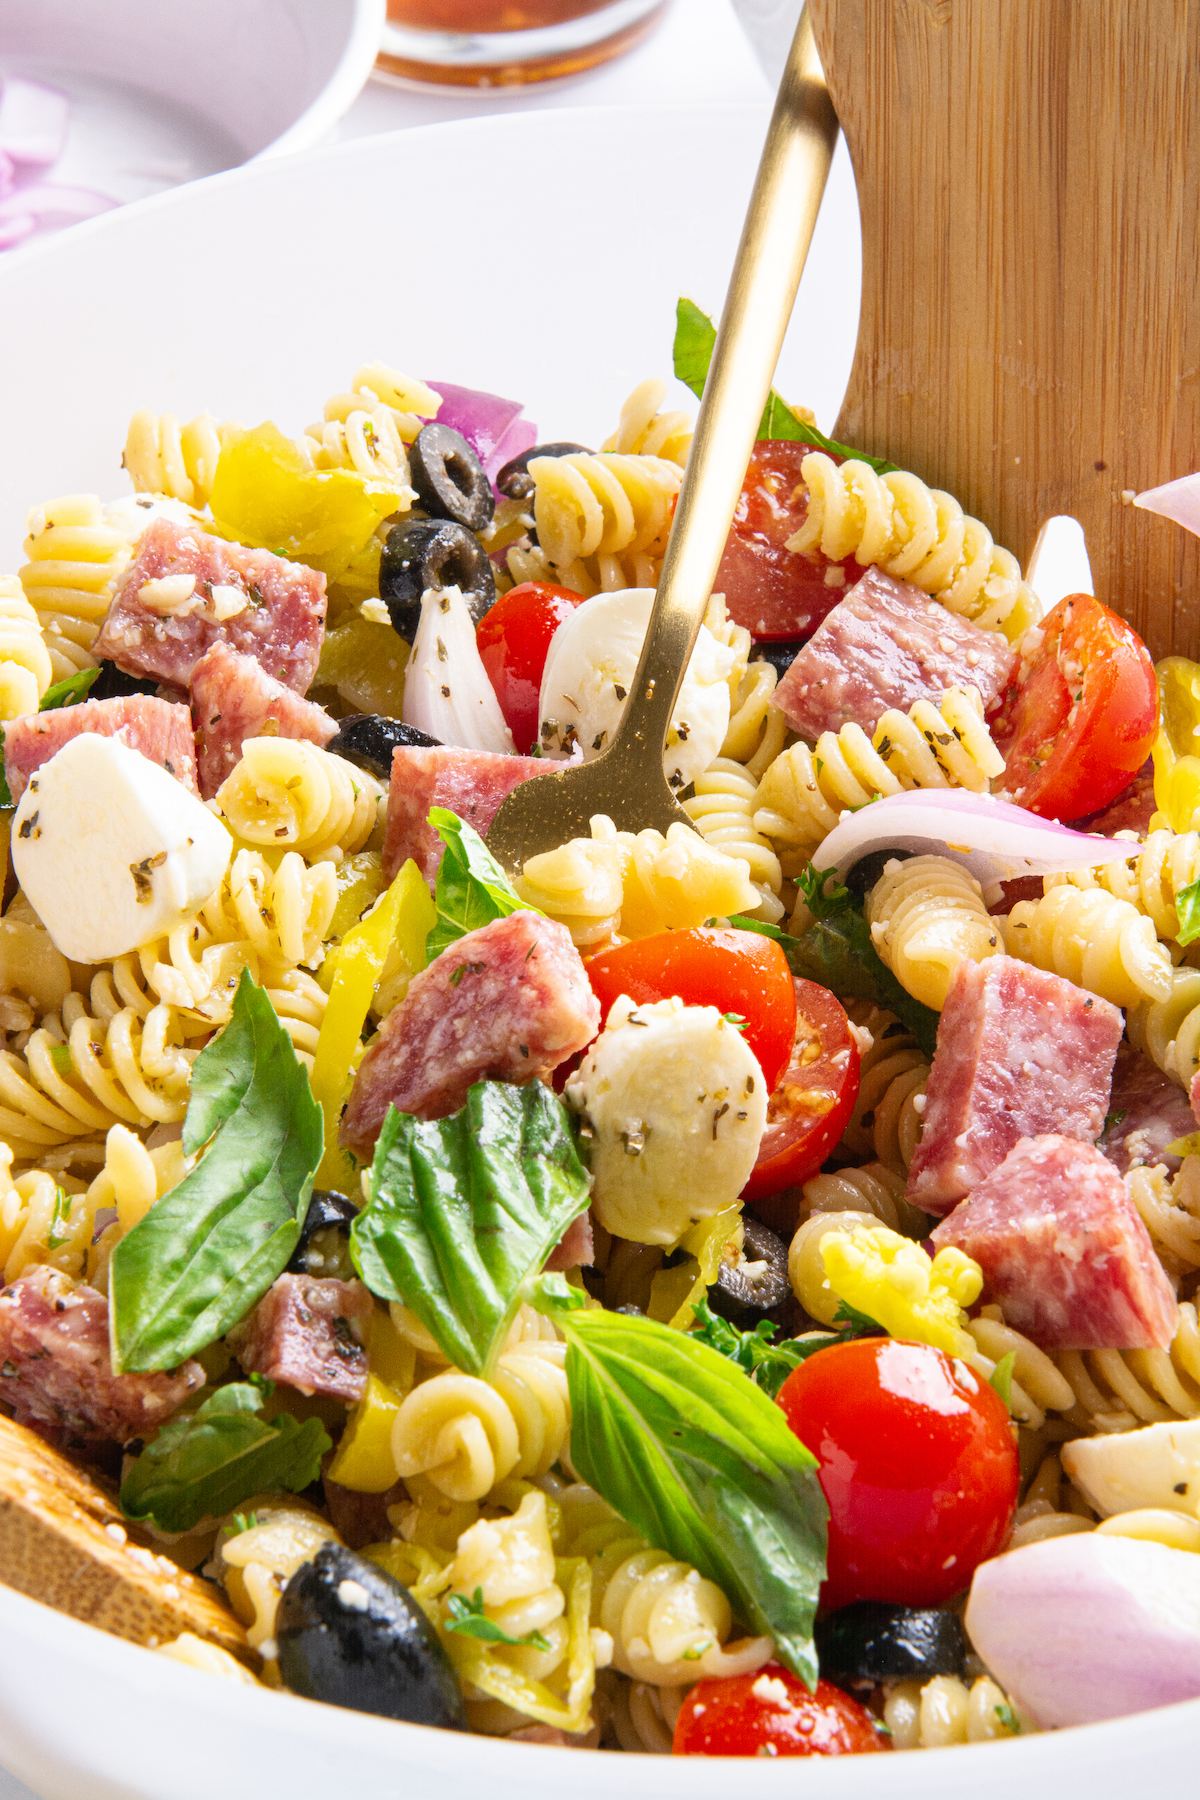 A bowl of Italian pasta salad with a gold fork. Ingredients include cooked rotini pasta, sliced cherry tomatoes, chopped parsley, sliced red onion, sliced pepperoncini, sliced black olives, chopped dry salami, mozzarella balls, grated Parmesan cheese.